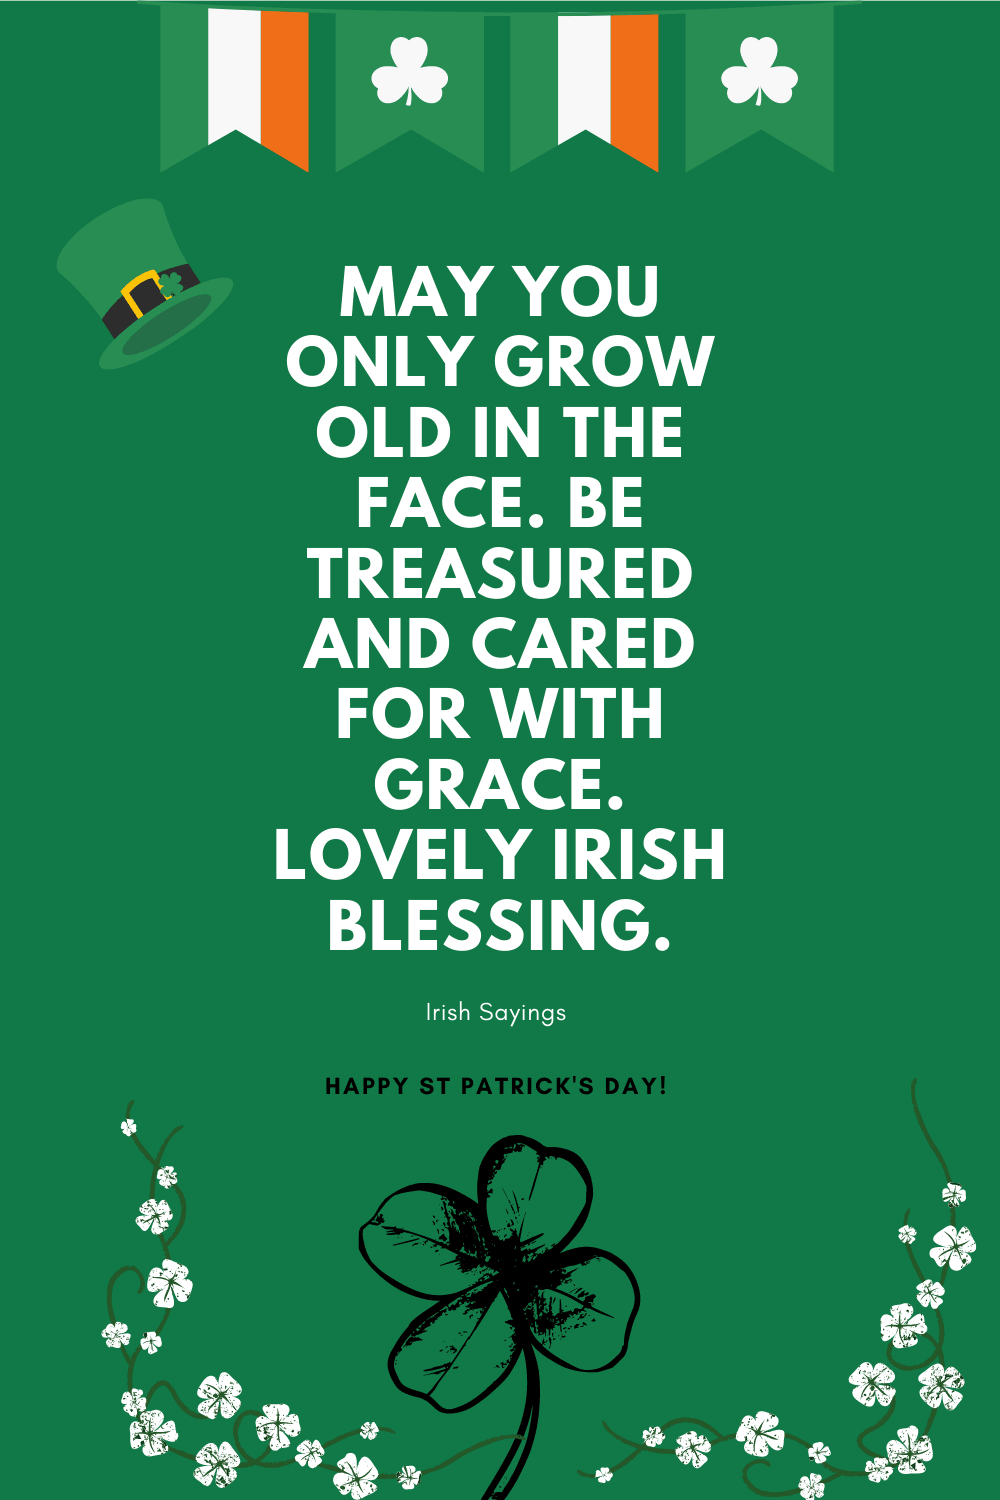 150 Incredible Irish Sayings And Irish Blessings For St Patrick's Day 2023